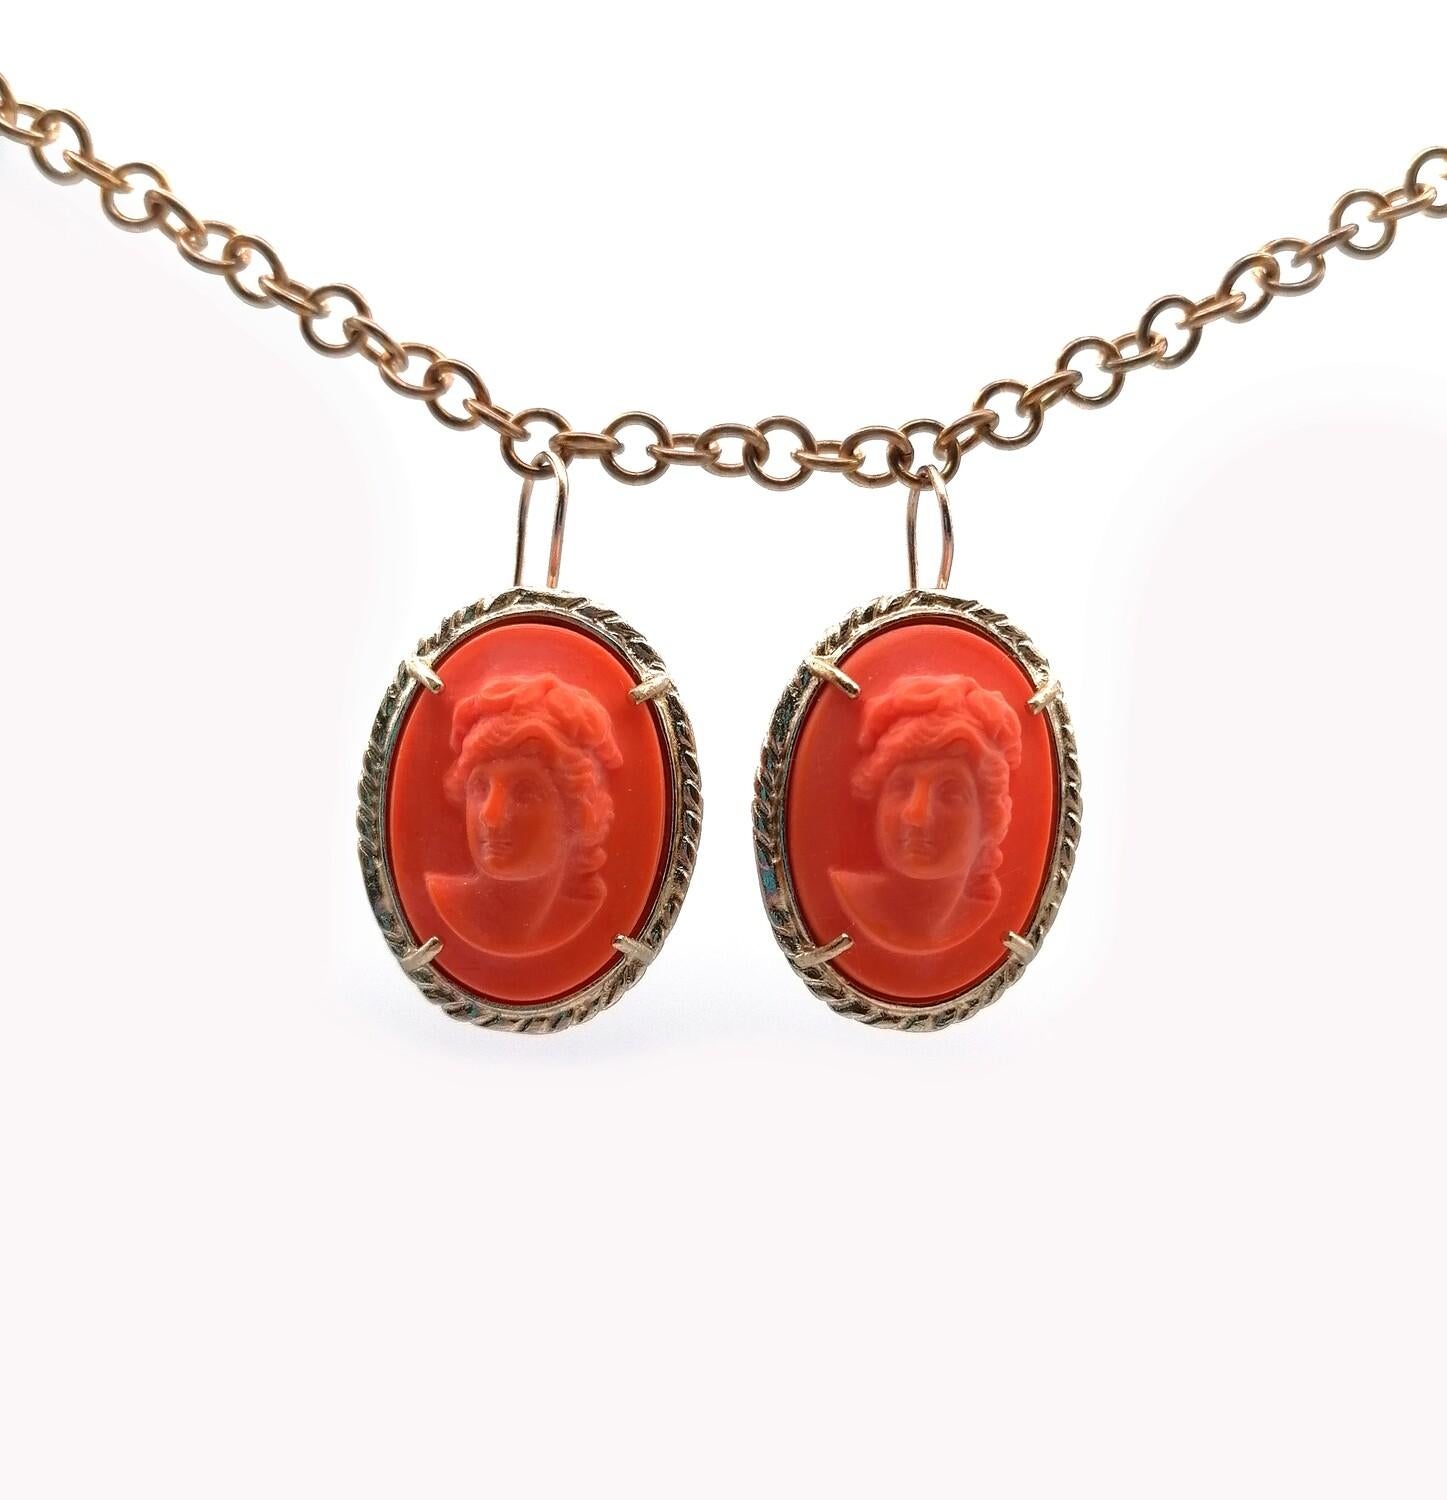 Red Coral Earrings in Pure Bronze and Glass Paste by Patrizia Daliana In New Condition For Sale In Firenze, FI